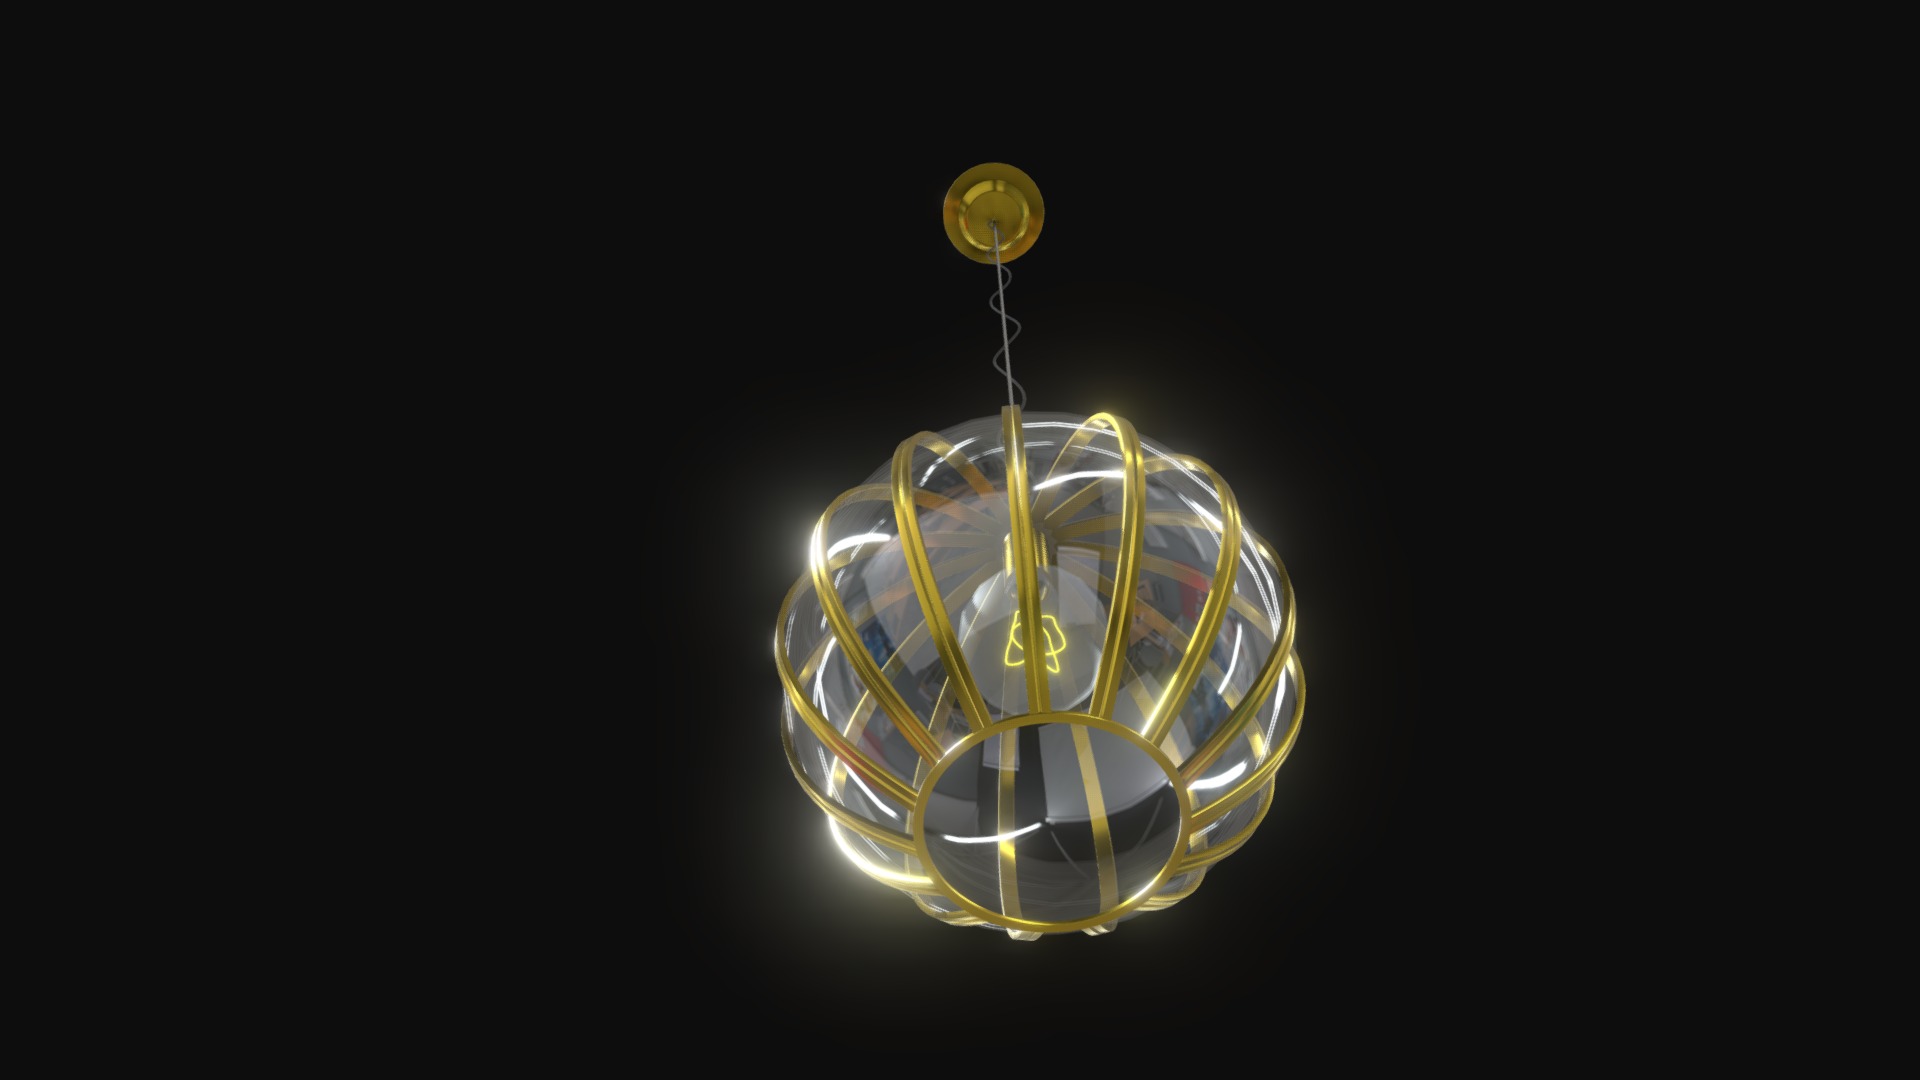 3D model HGPDU36083 - This is a 3D model of the HGPDU36083. The 3D model is about a gold and black ball.